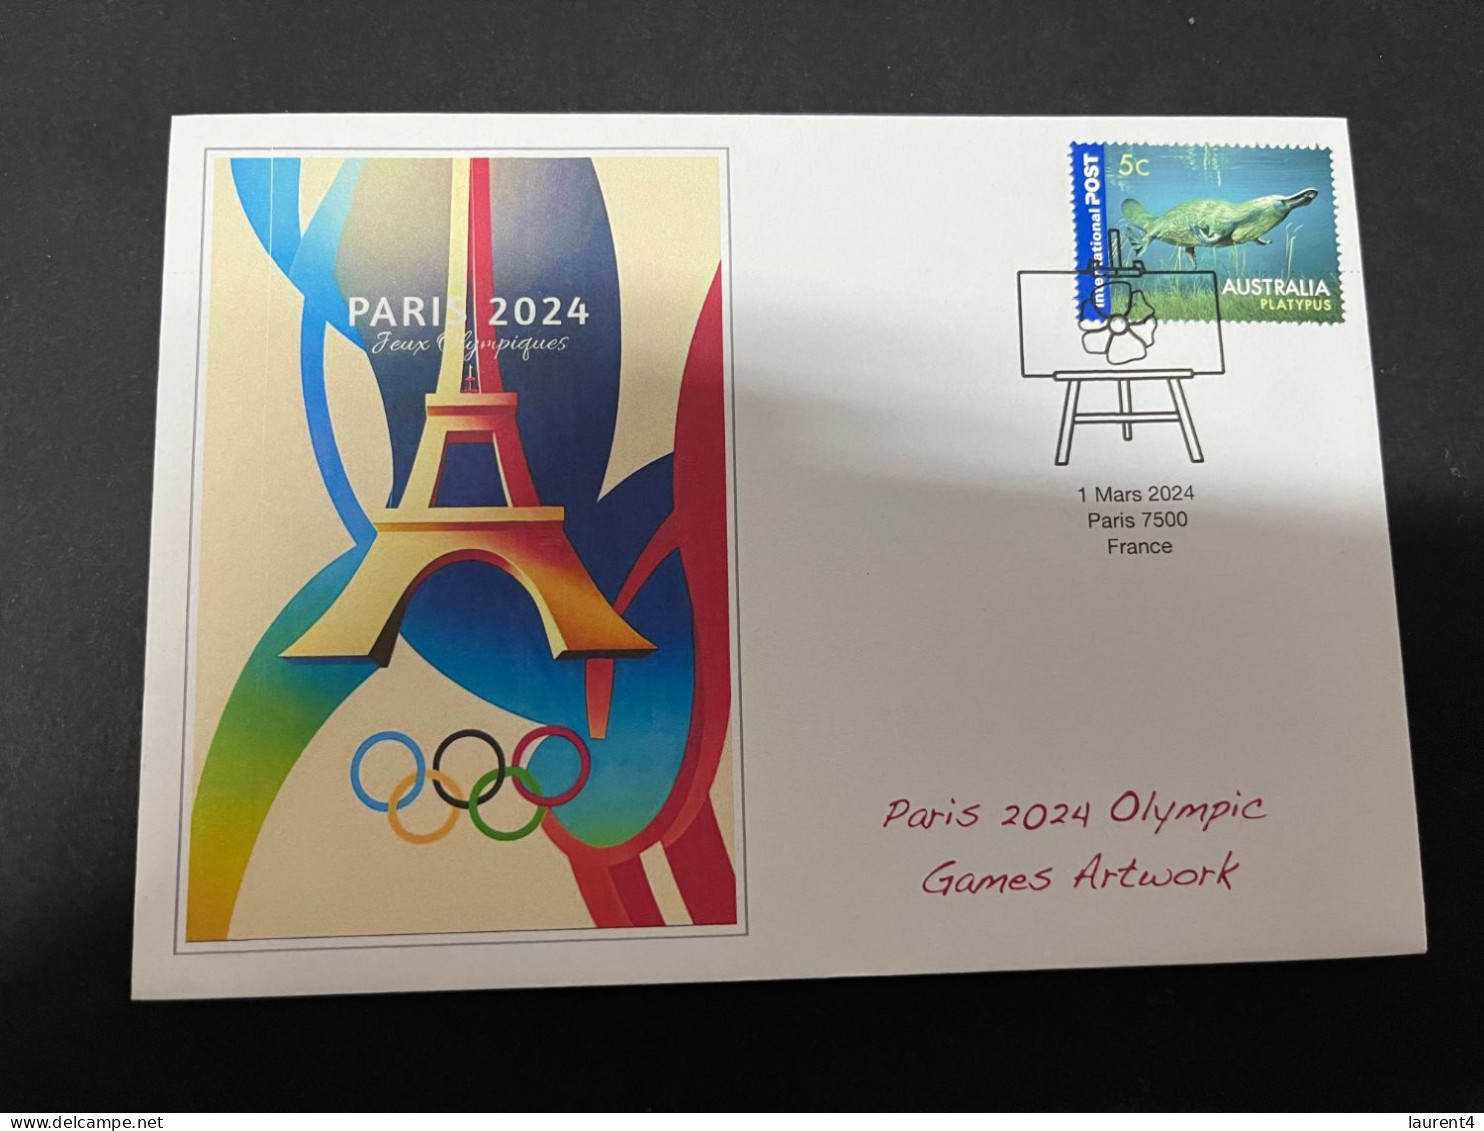 9-3-2024 (2 Y 33) Paris Olympic Games 2024 - 3 (of 12 Covers Series) For The Paris 2024 Olympic Games Artwork - Verano 2024 : París